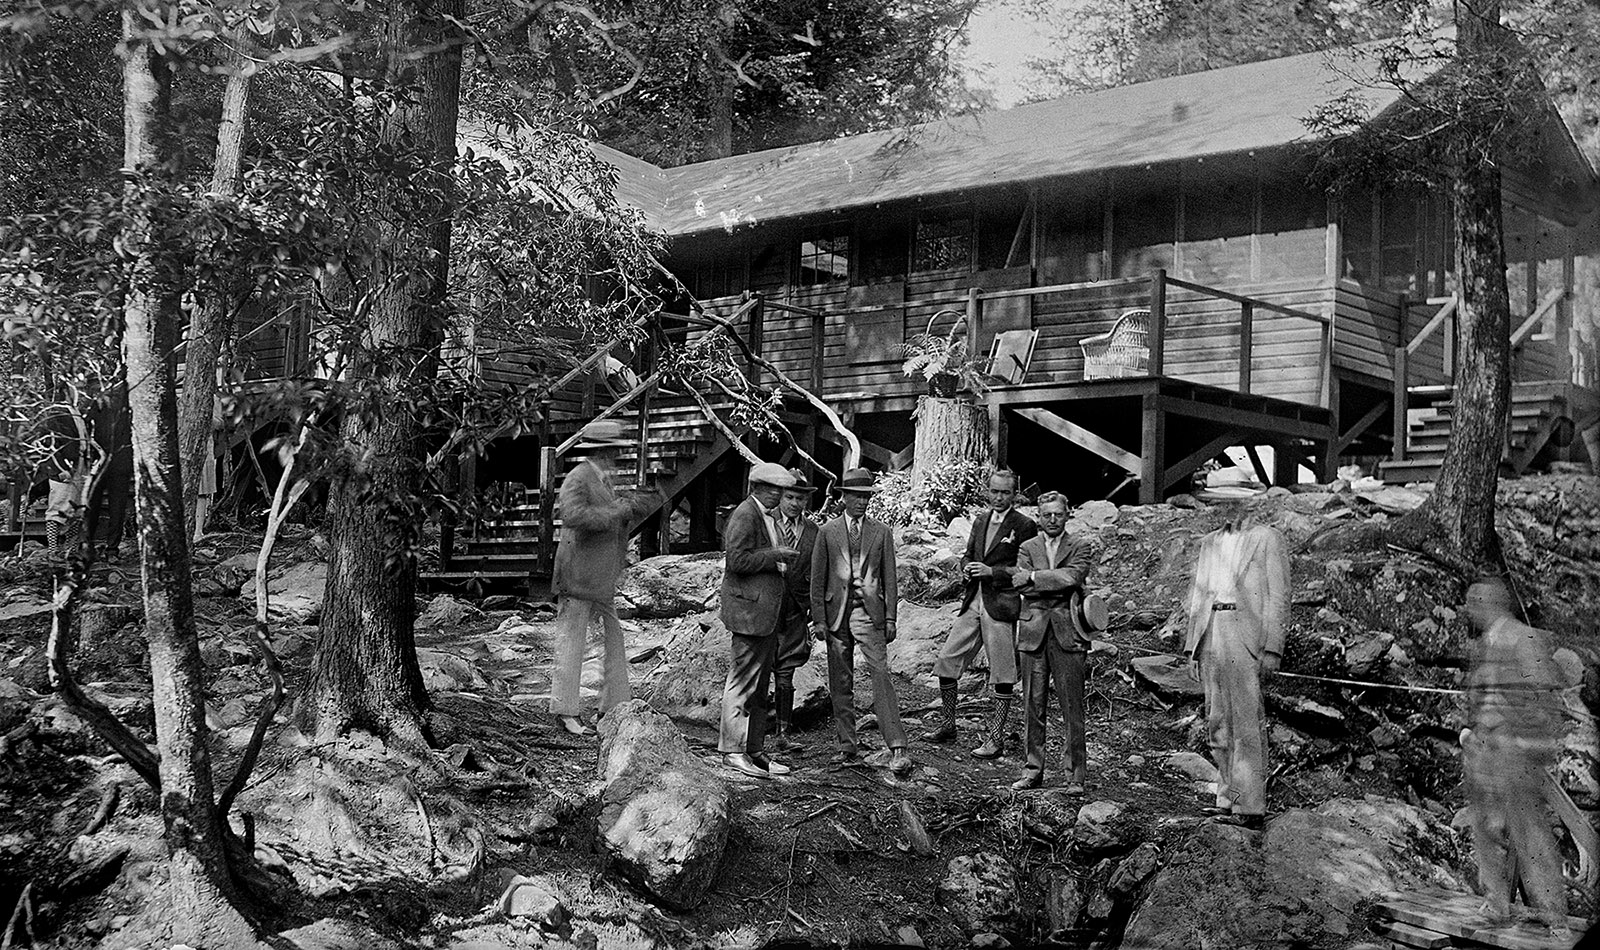 A black-and-white photo of a group of people in 1930s-era clothing standing in front of The Brown House, a wooden residence built on an overlook of the Rapidan River.